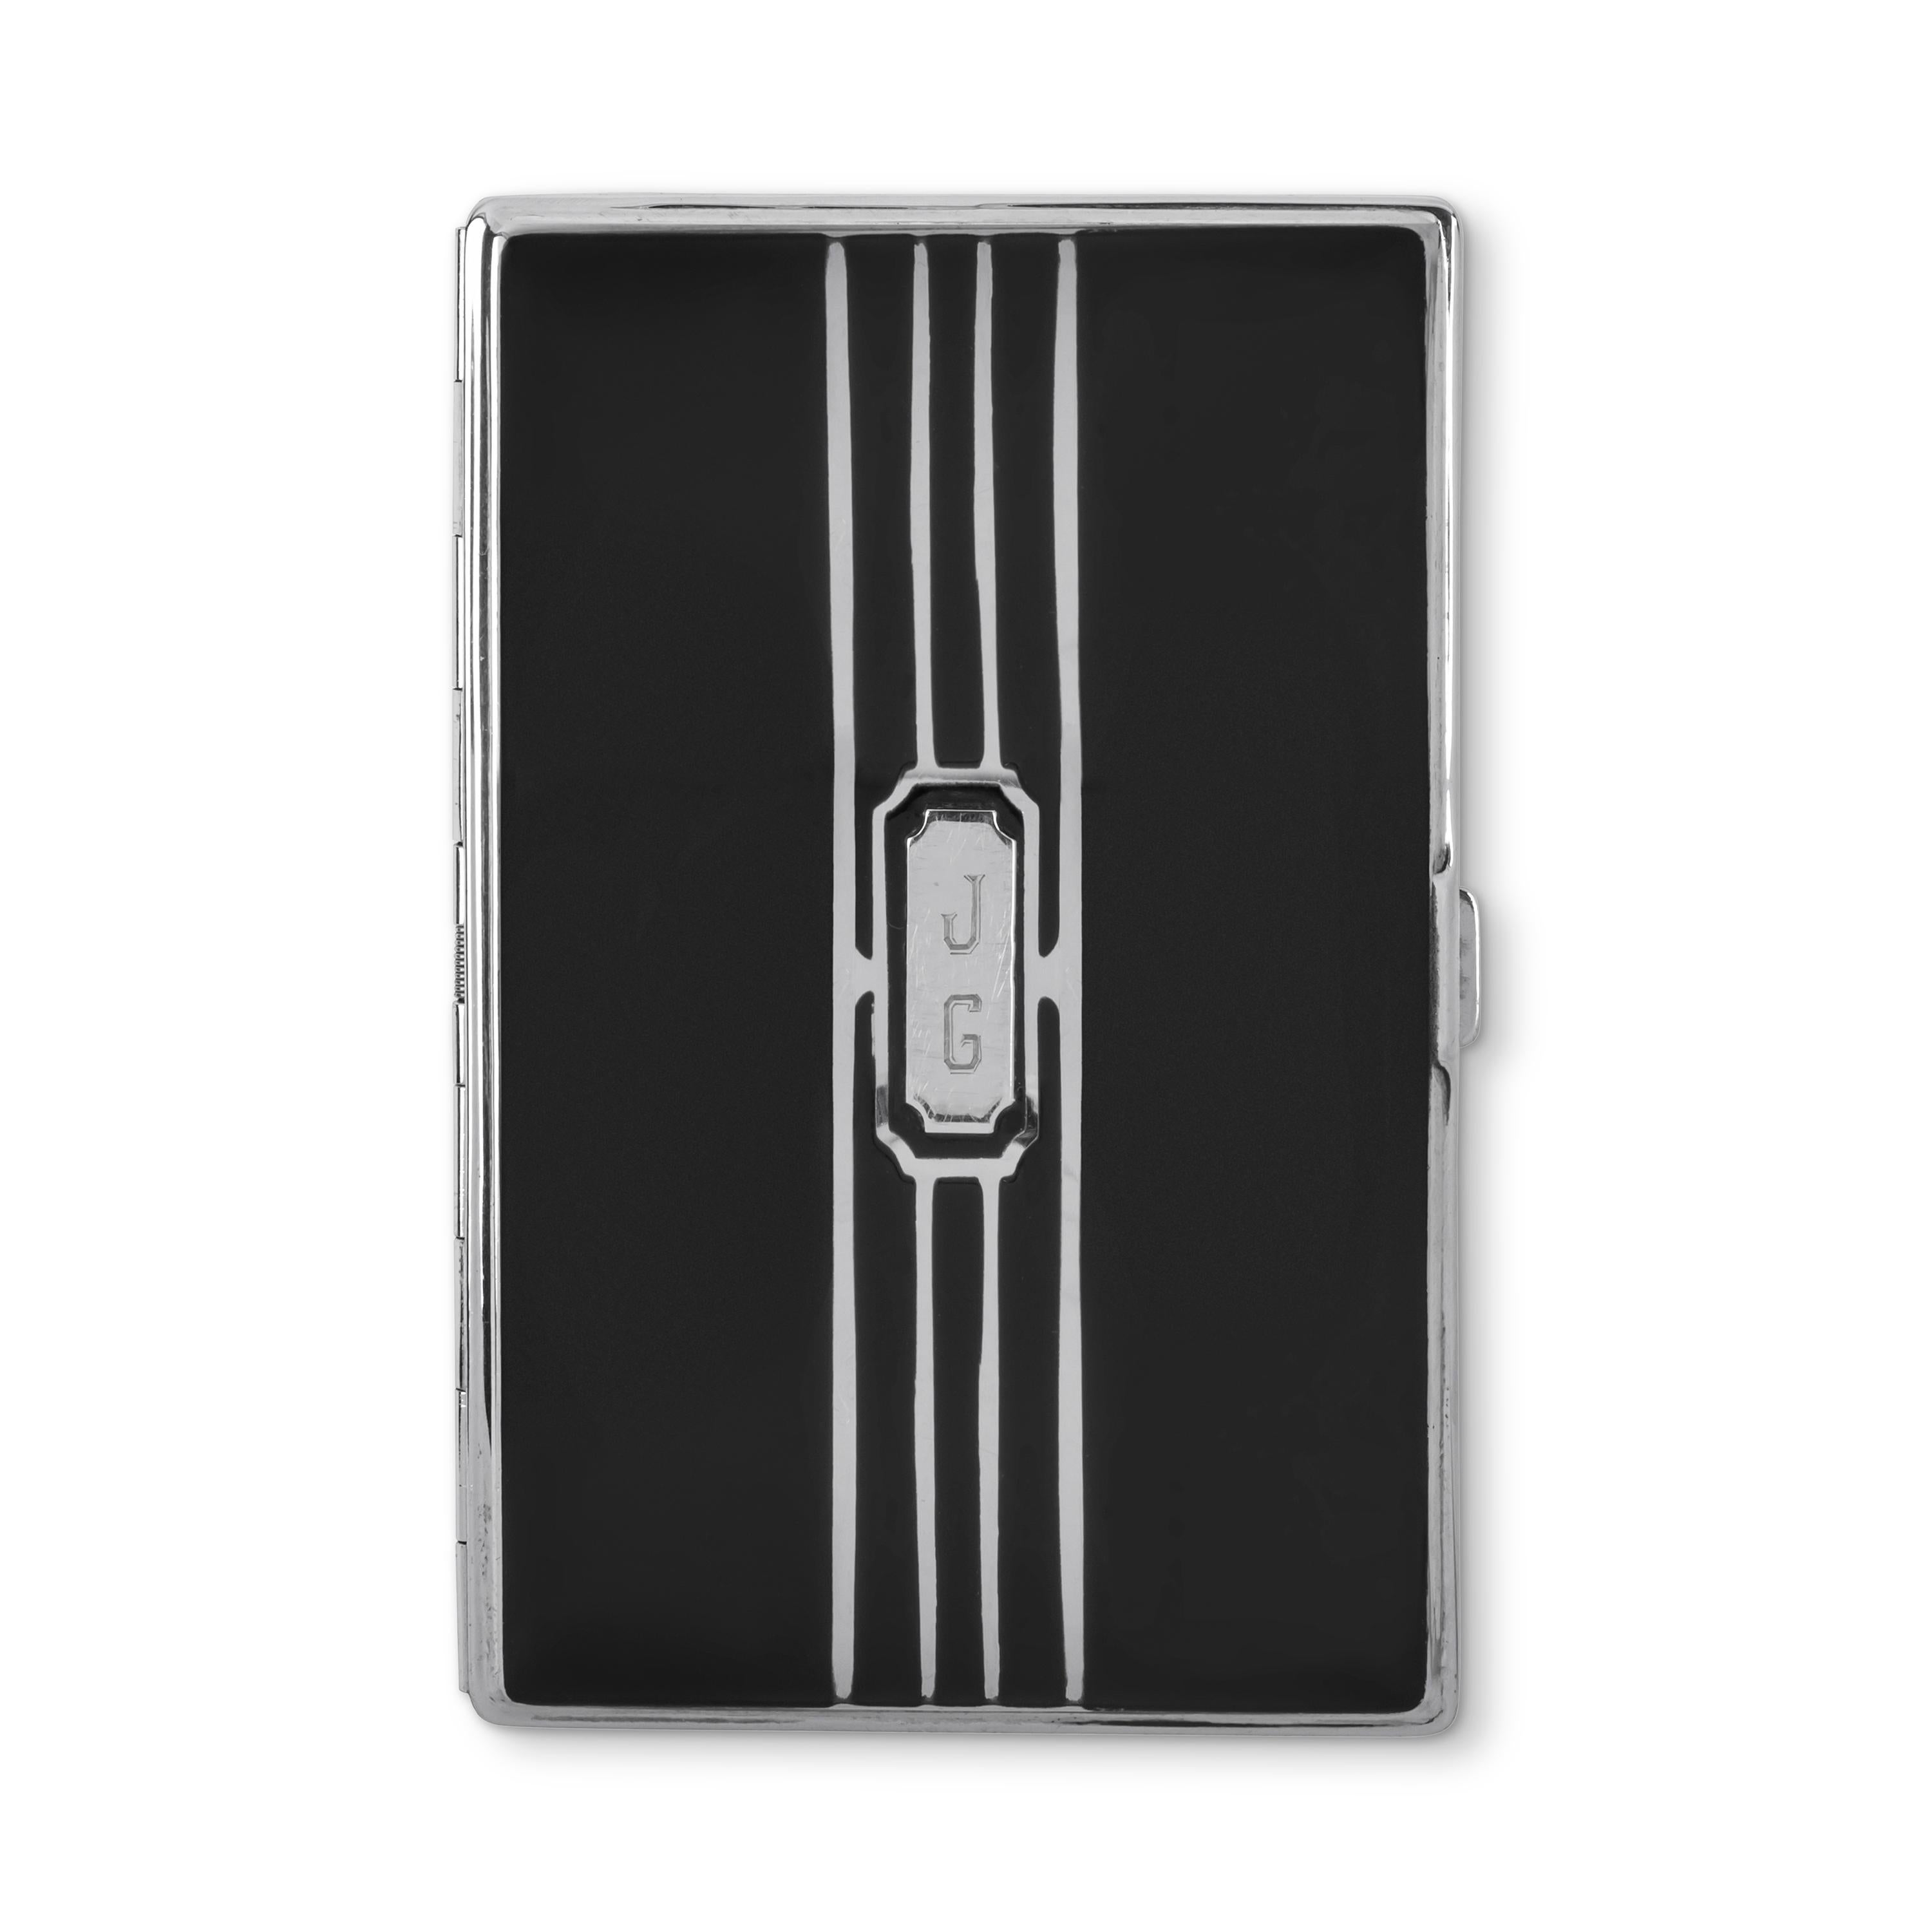 RETRO and VINTAGE WORKING RONSON BLACK & SILVER CIGARETTE CASE 
3 1/8” x 5”
Silver 
Signed 
Black enamel 
In mint condition 
Clasp works perfectly
Feels heavy and expensive 
First owner from estate
Artdeco 
Perfect for a special gift with rich